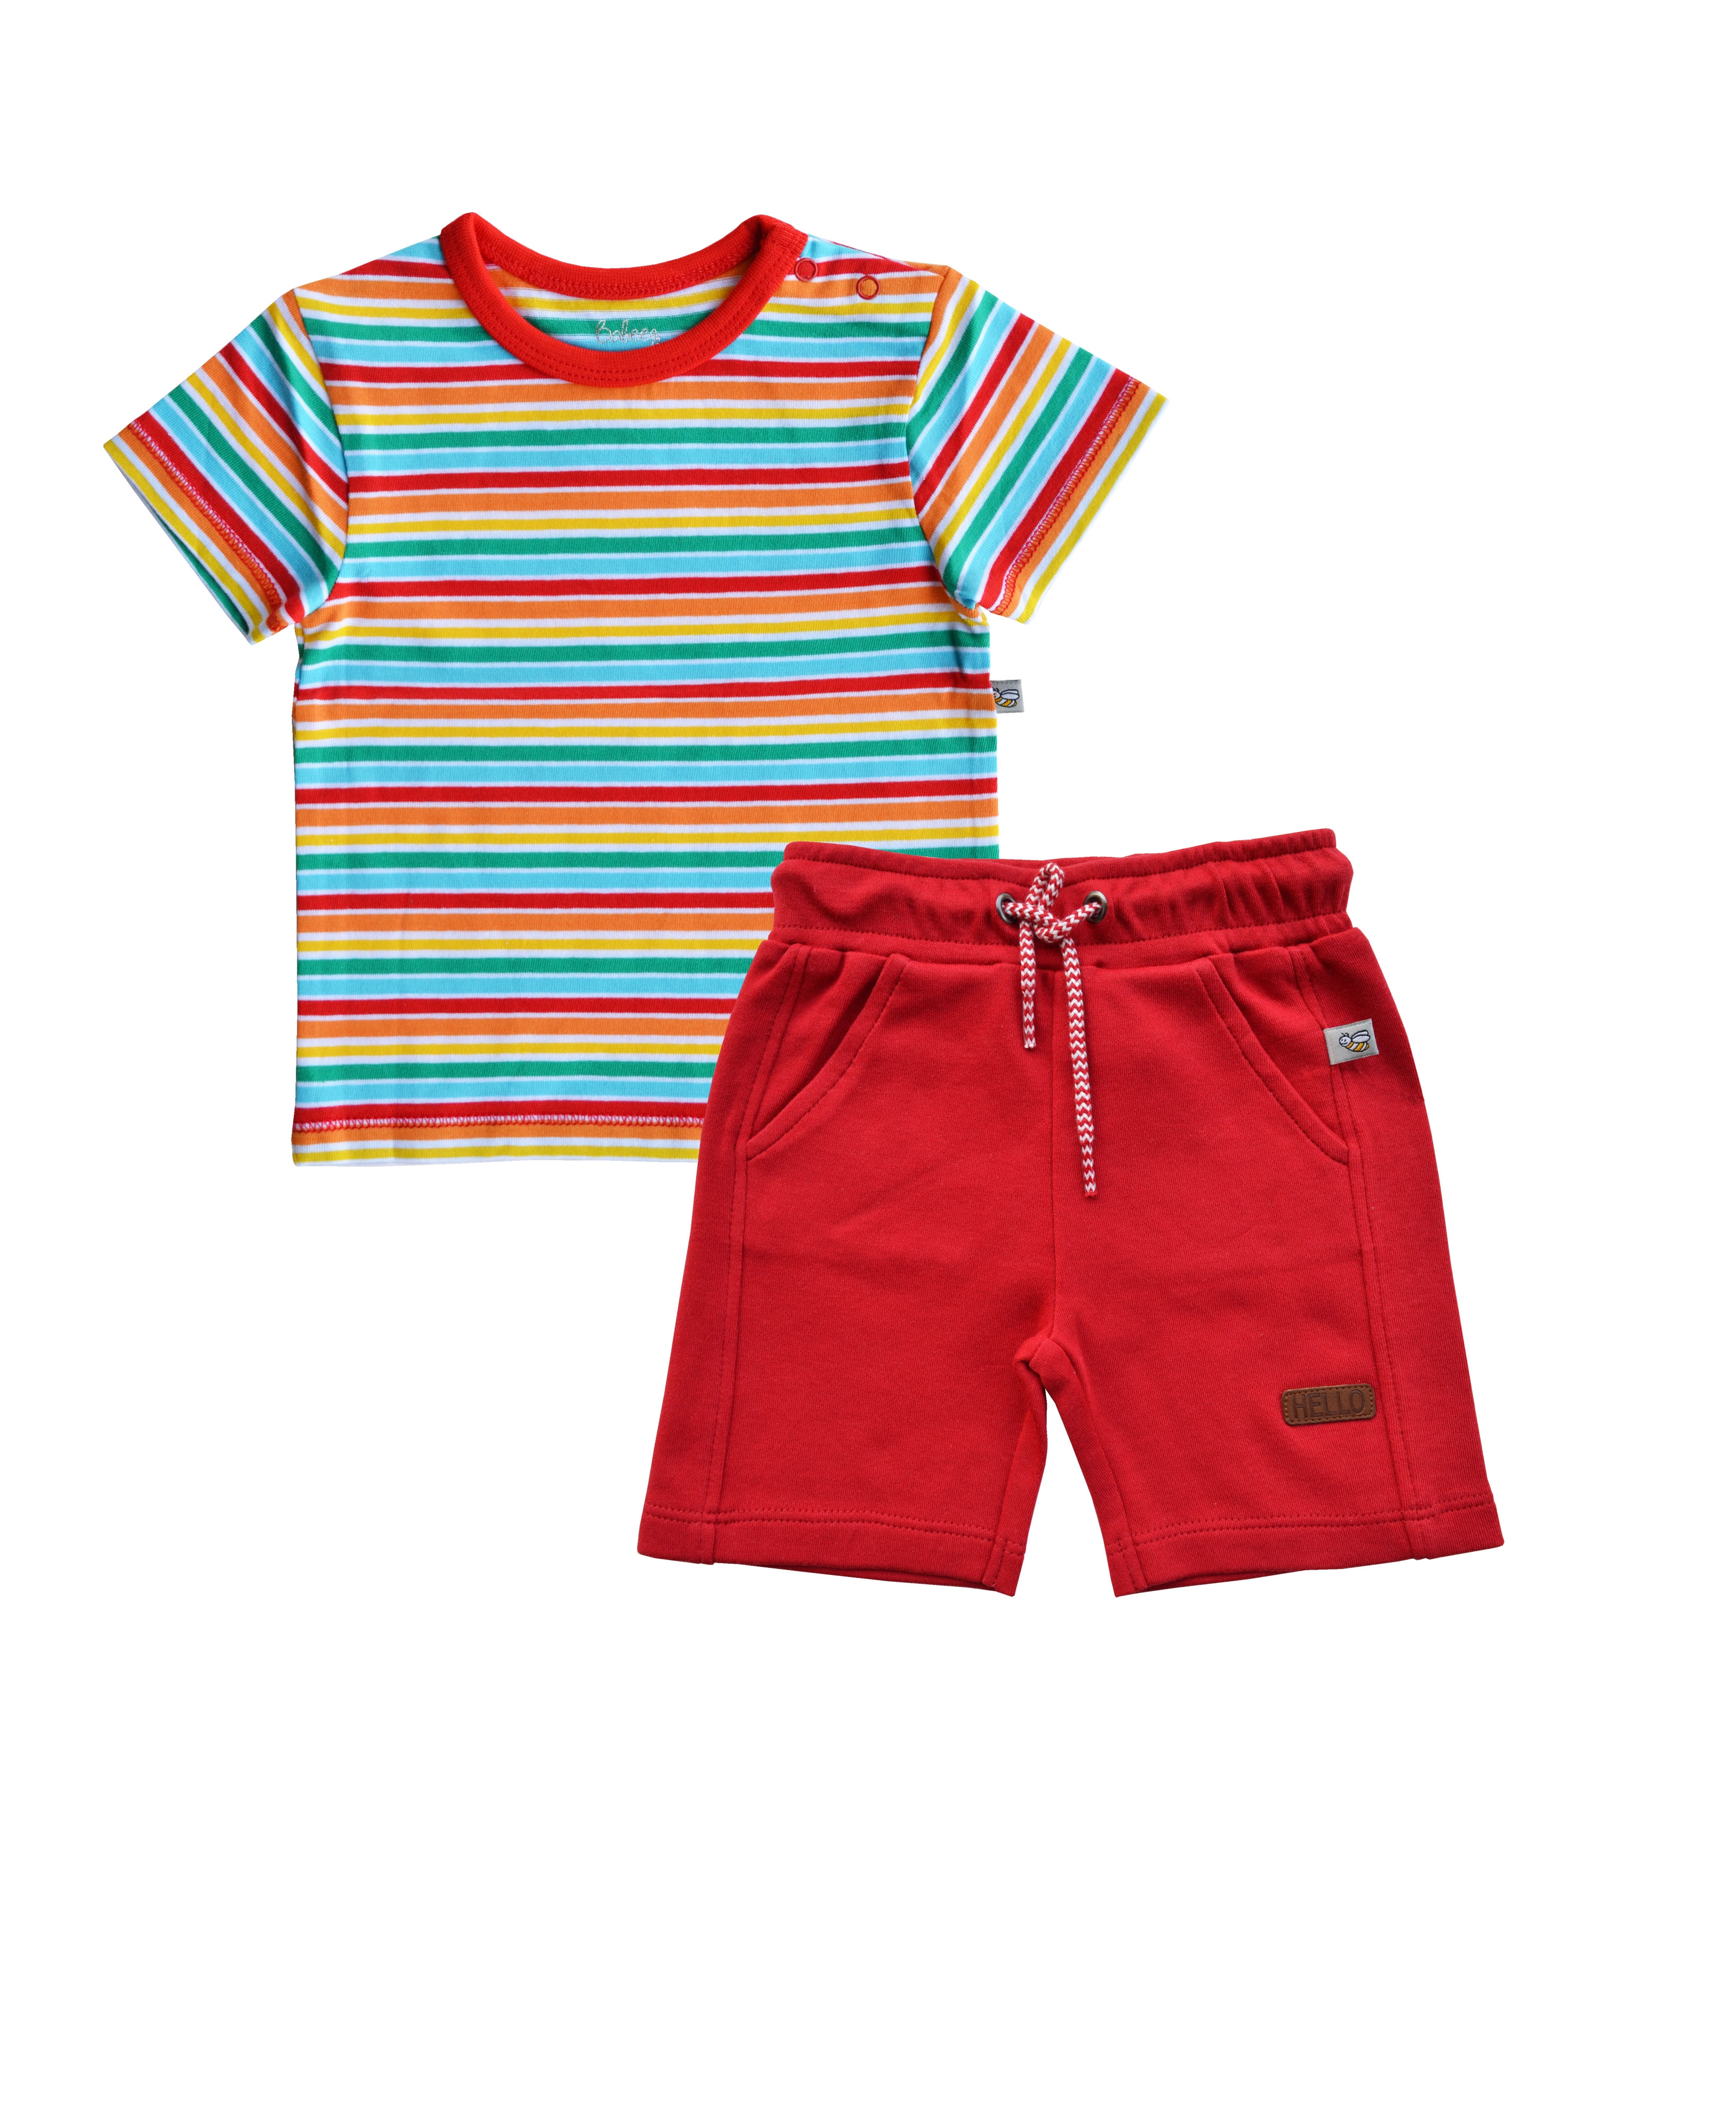 Babeez | Short Sleeves Stripes T-Shirt and Red Shorts(100% Cotton Single Jersey) undefined